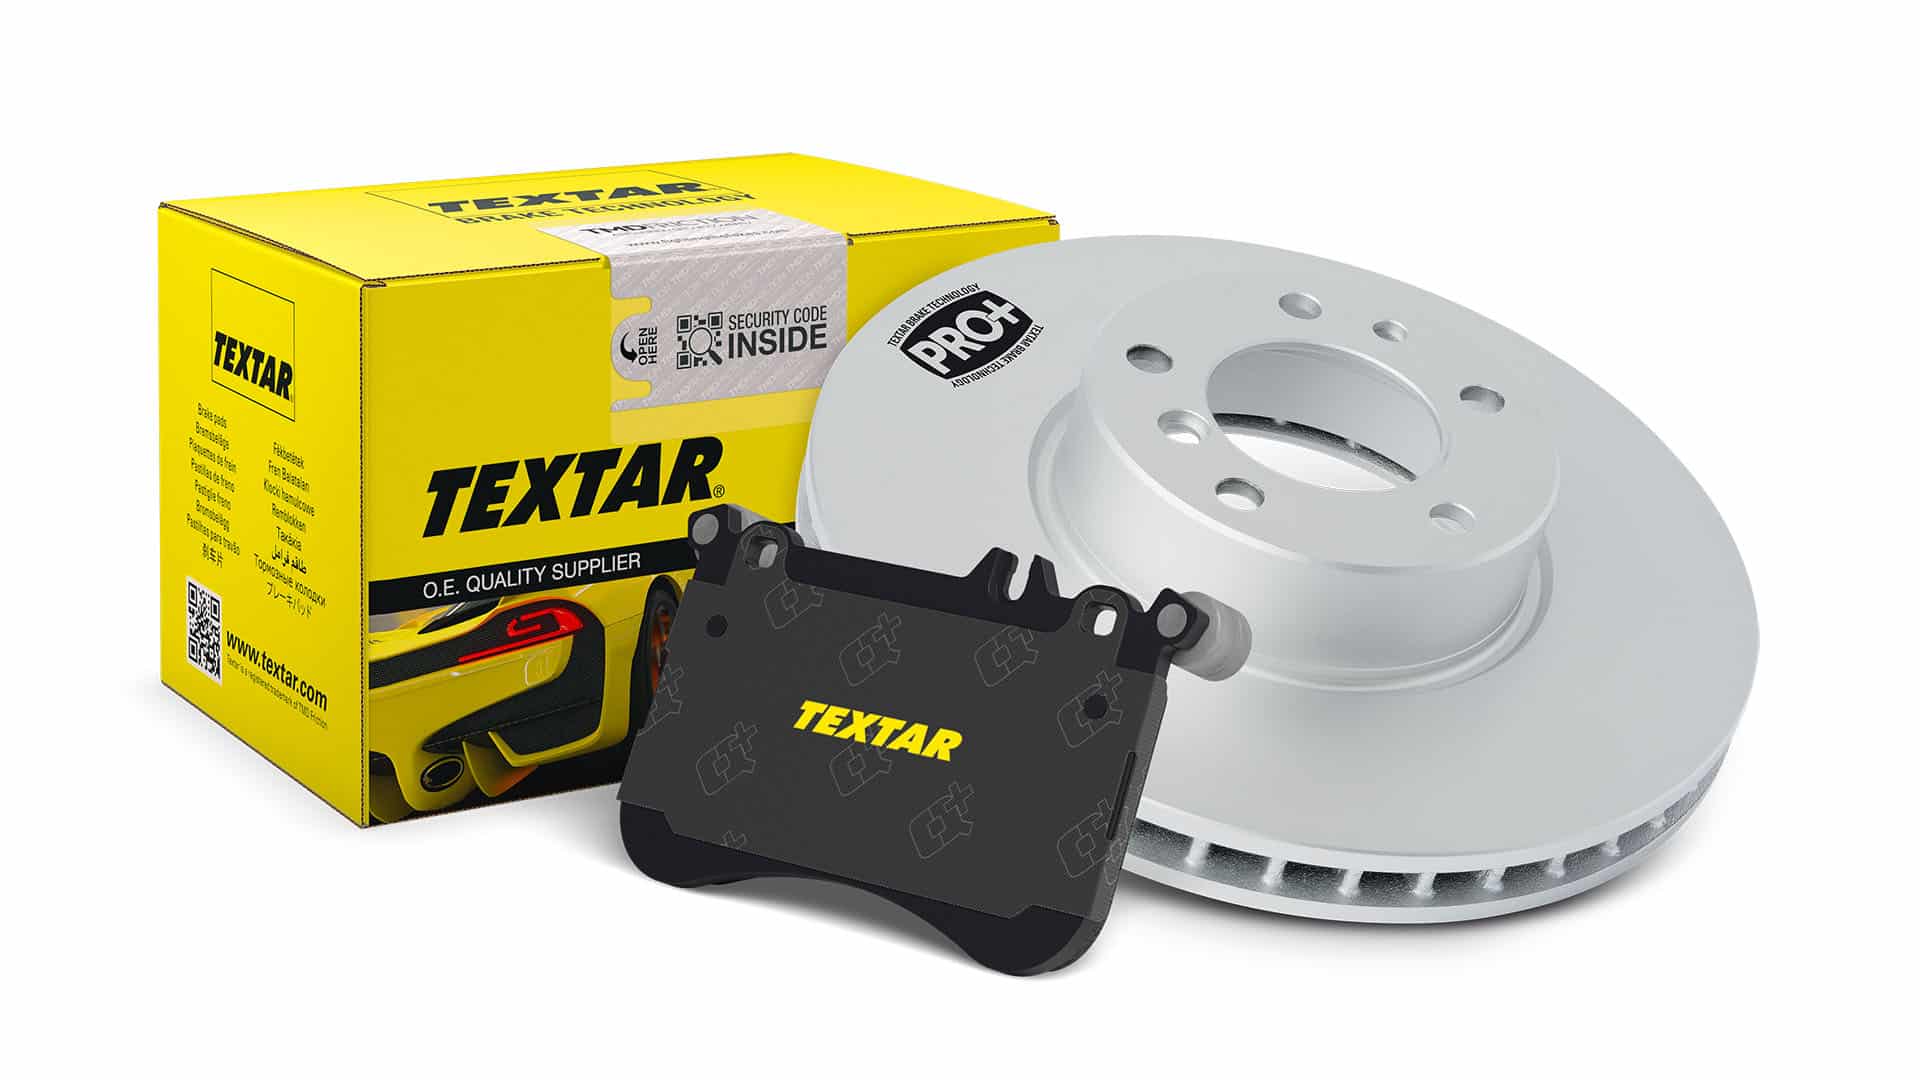 Textar expanded several product lines